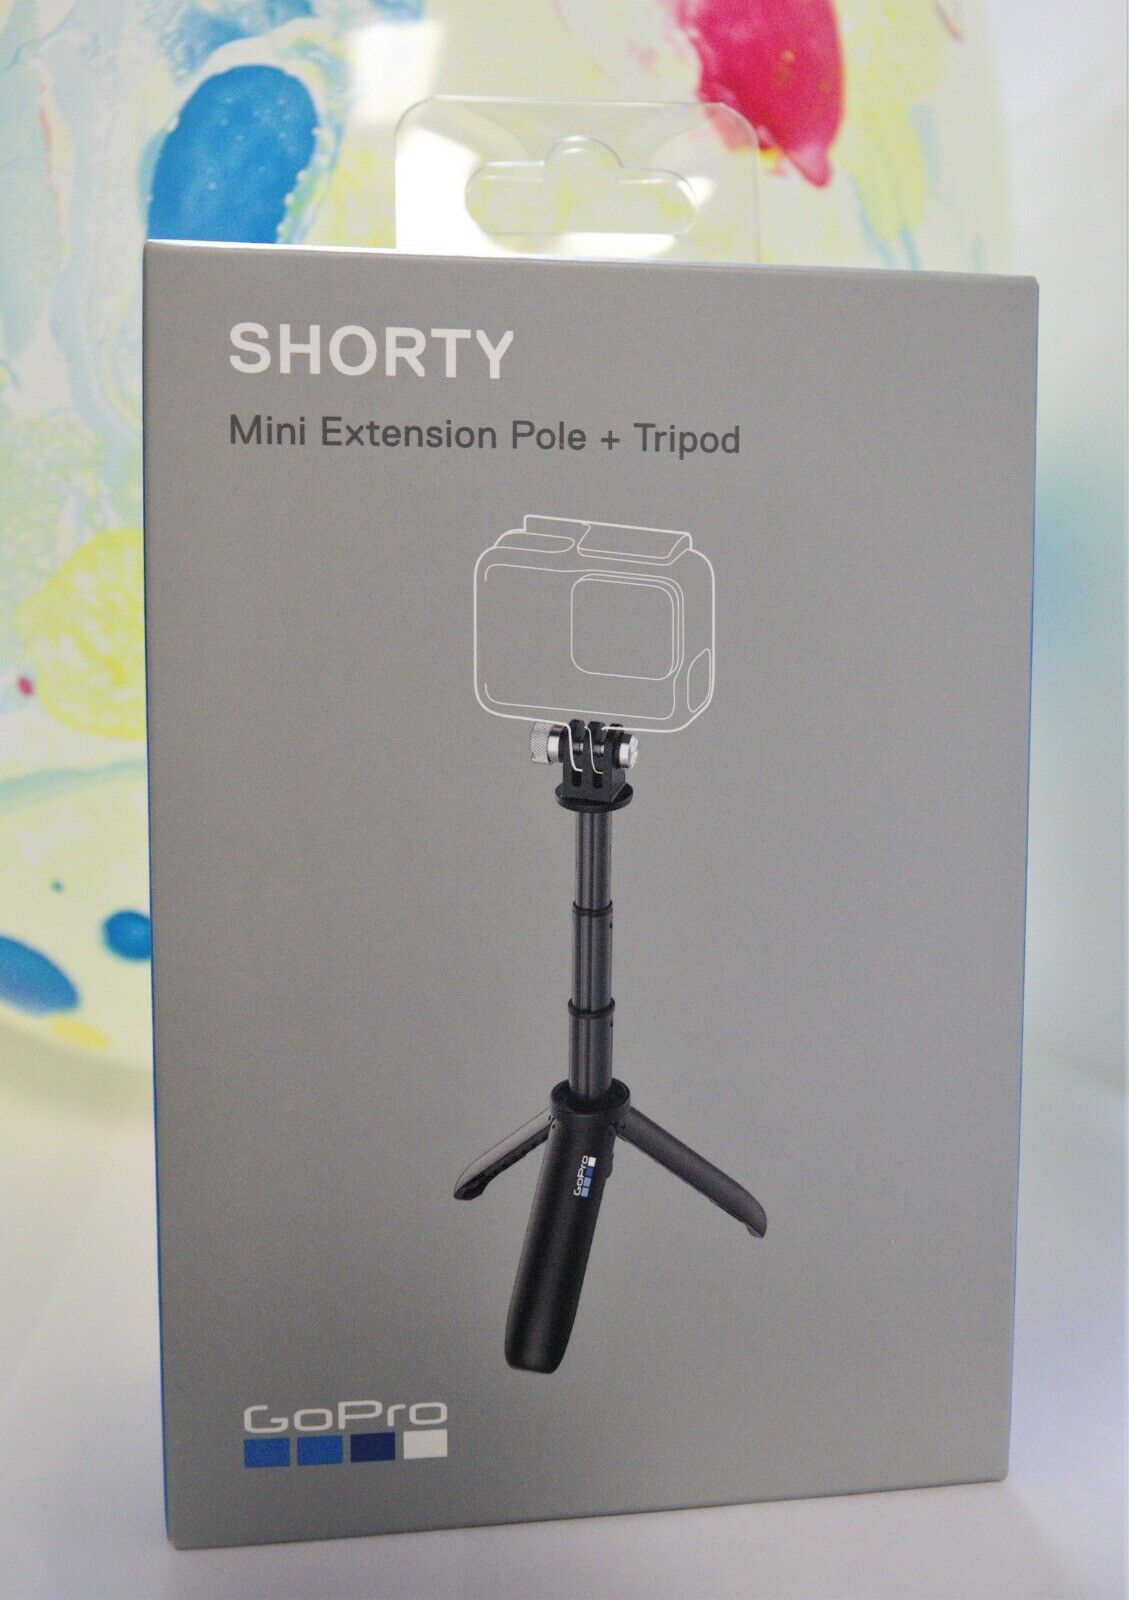 Gopro Shorty Mini Extension Pole + Tripod Afttm-001 For All Gopro Hero7 Hero6